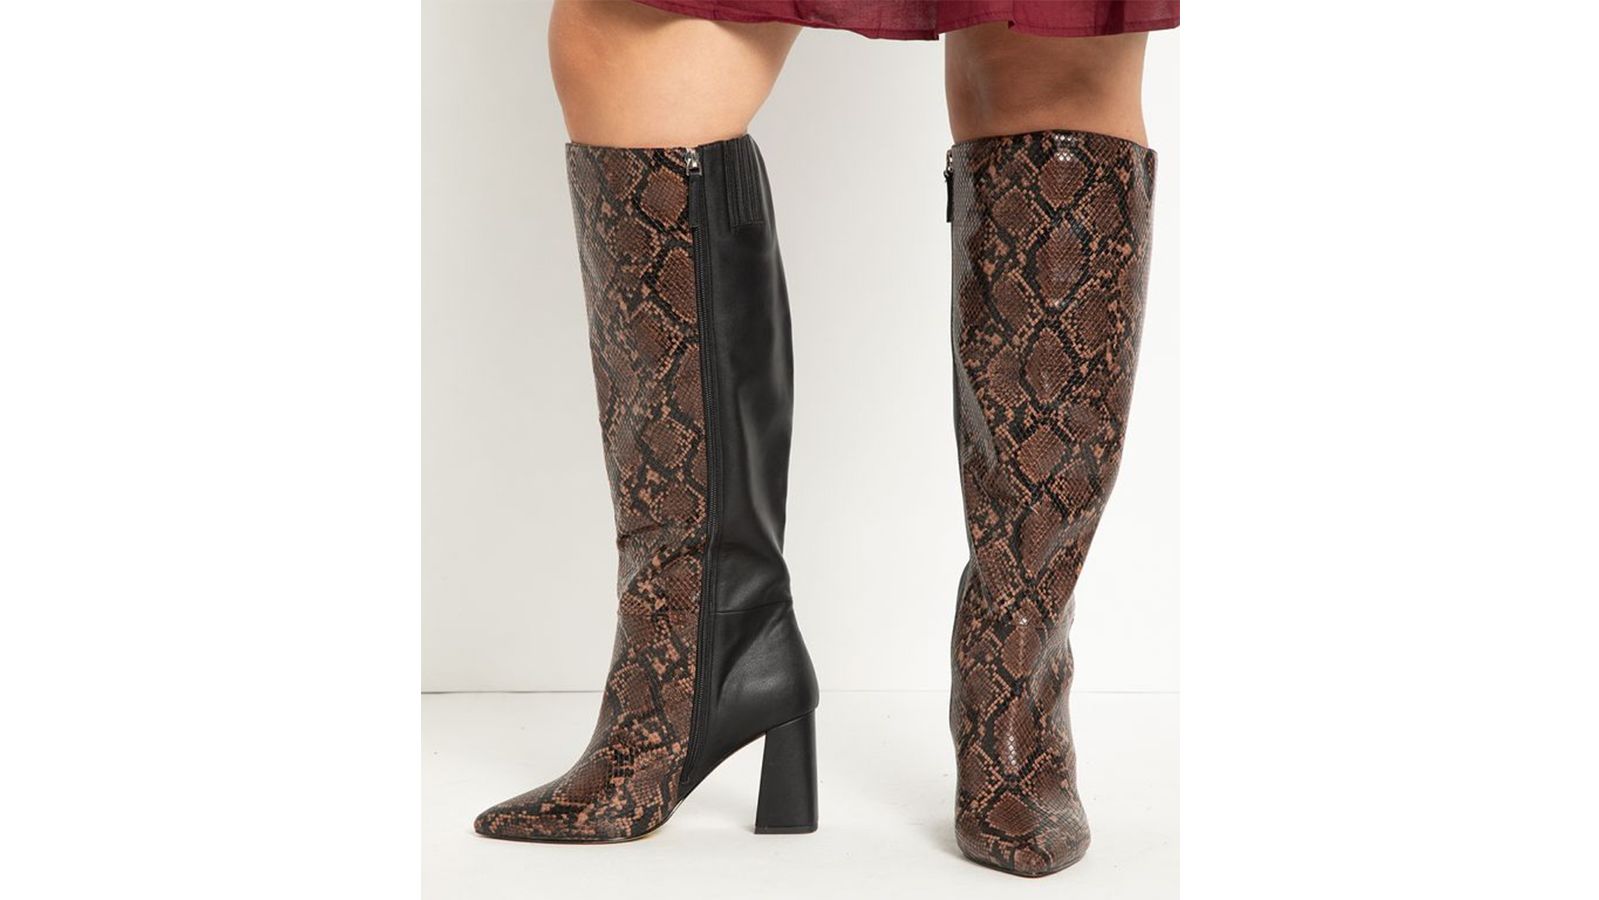 VIVAIA Boots Review: Wide Calf Boots for Women - Lizzie in Lace